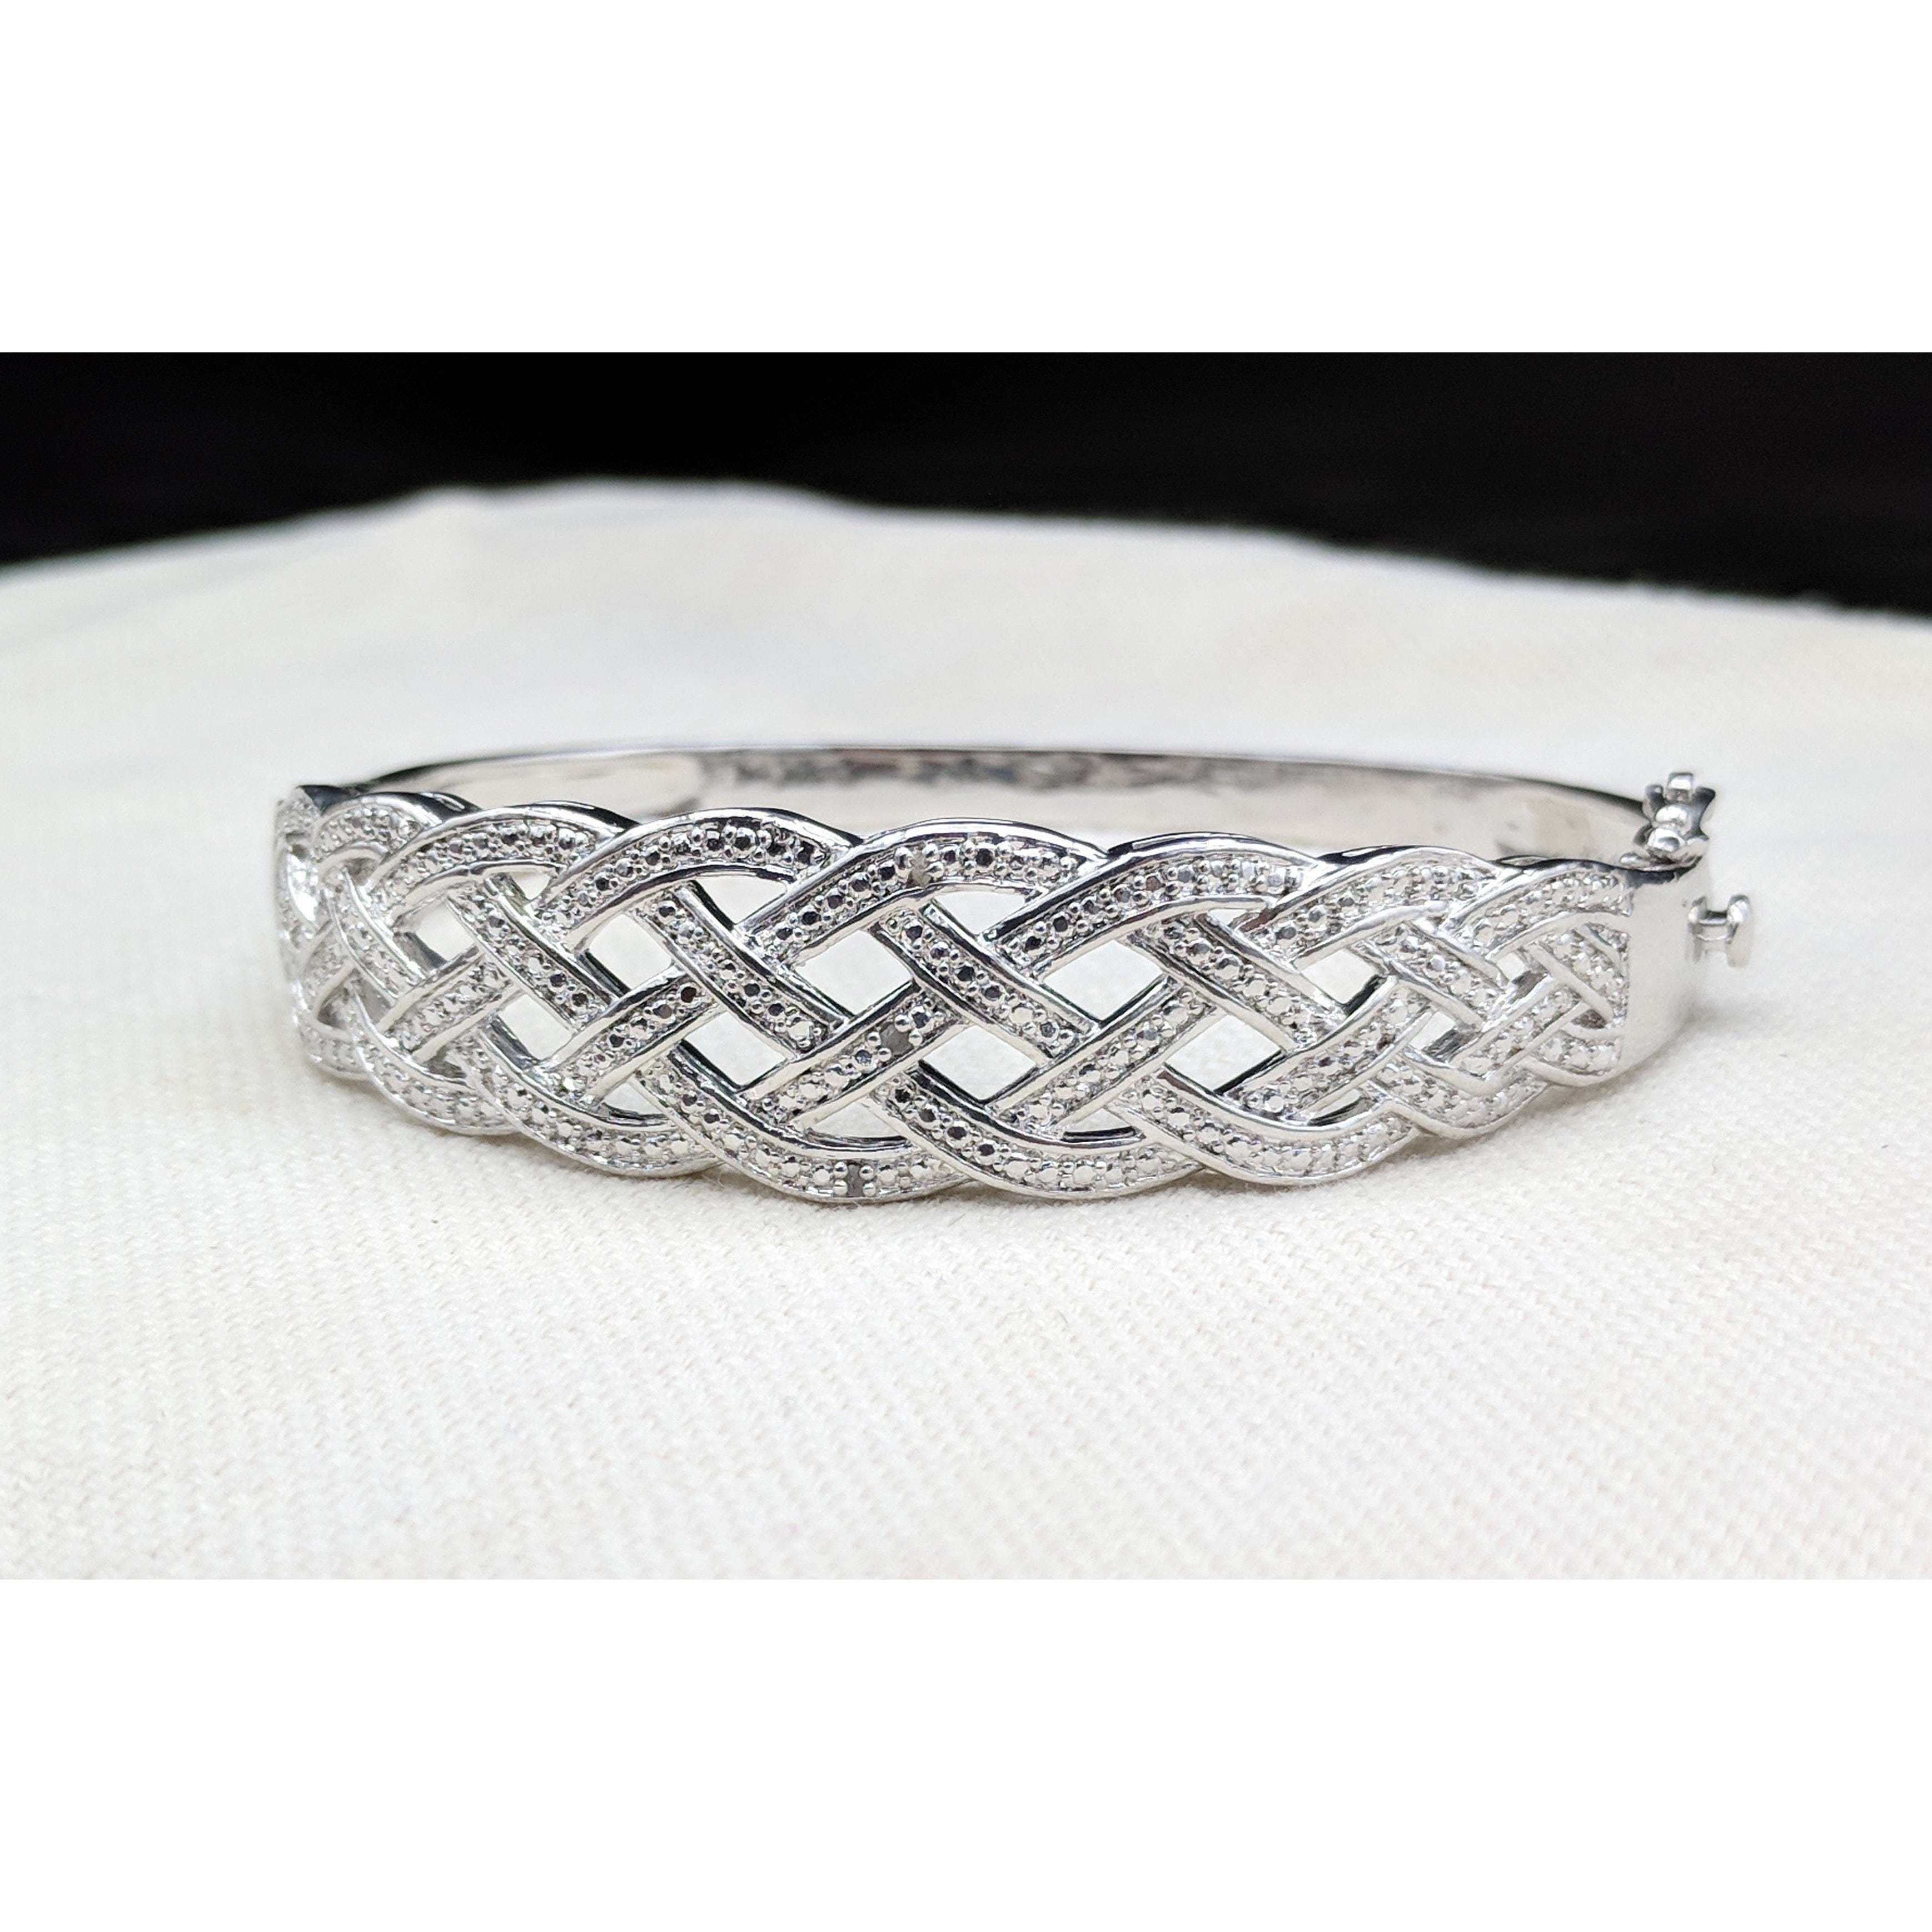 Natural Diamond Basket Weave Gold Plated Bangle Bracelet with REAL Diamonds! Very Affordable! - The Pink Pigs, A Compassionate Boutique